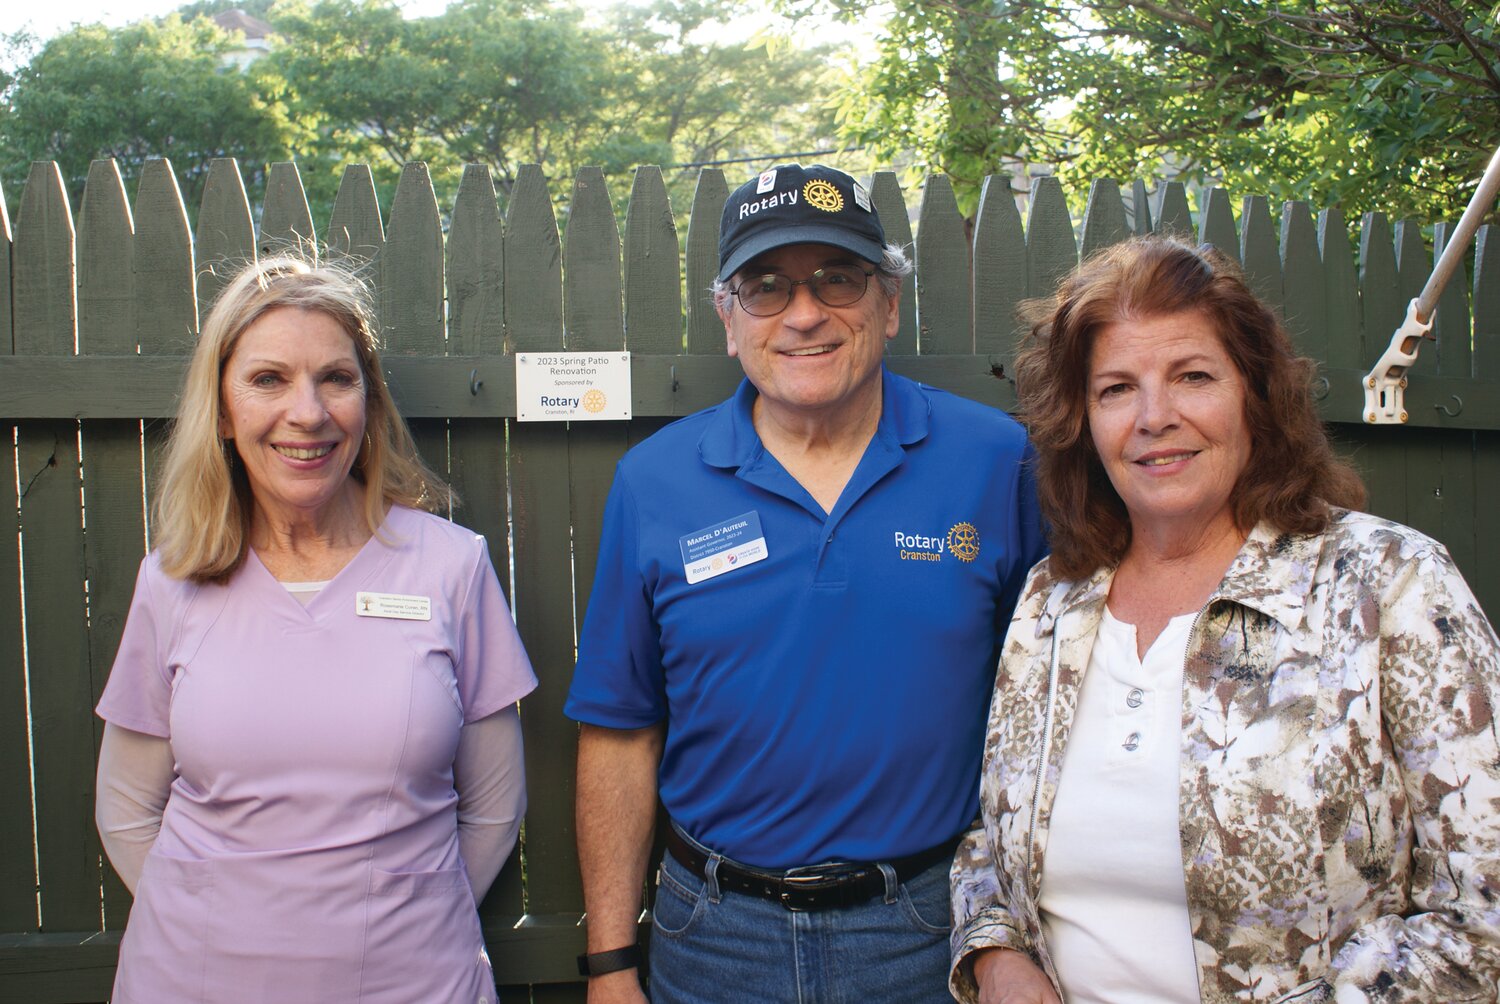 THANK YOU: Director Rosemary Coren (left) stands with Assistant Governor of the Rhode Island Rotary Marcel D’Auteuil (center) and Cranston Rotary Community Service Director Lori Adamo.